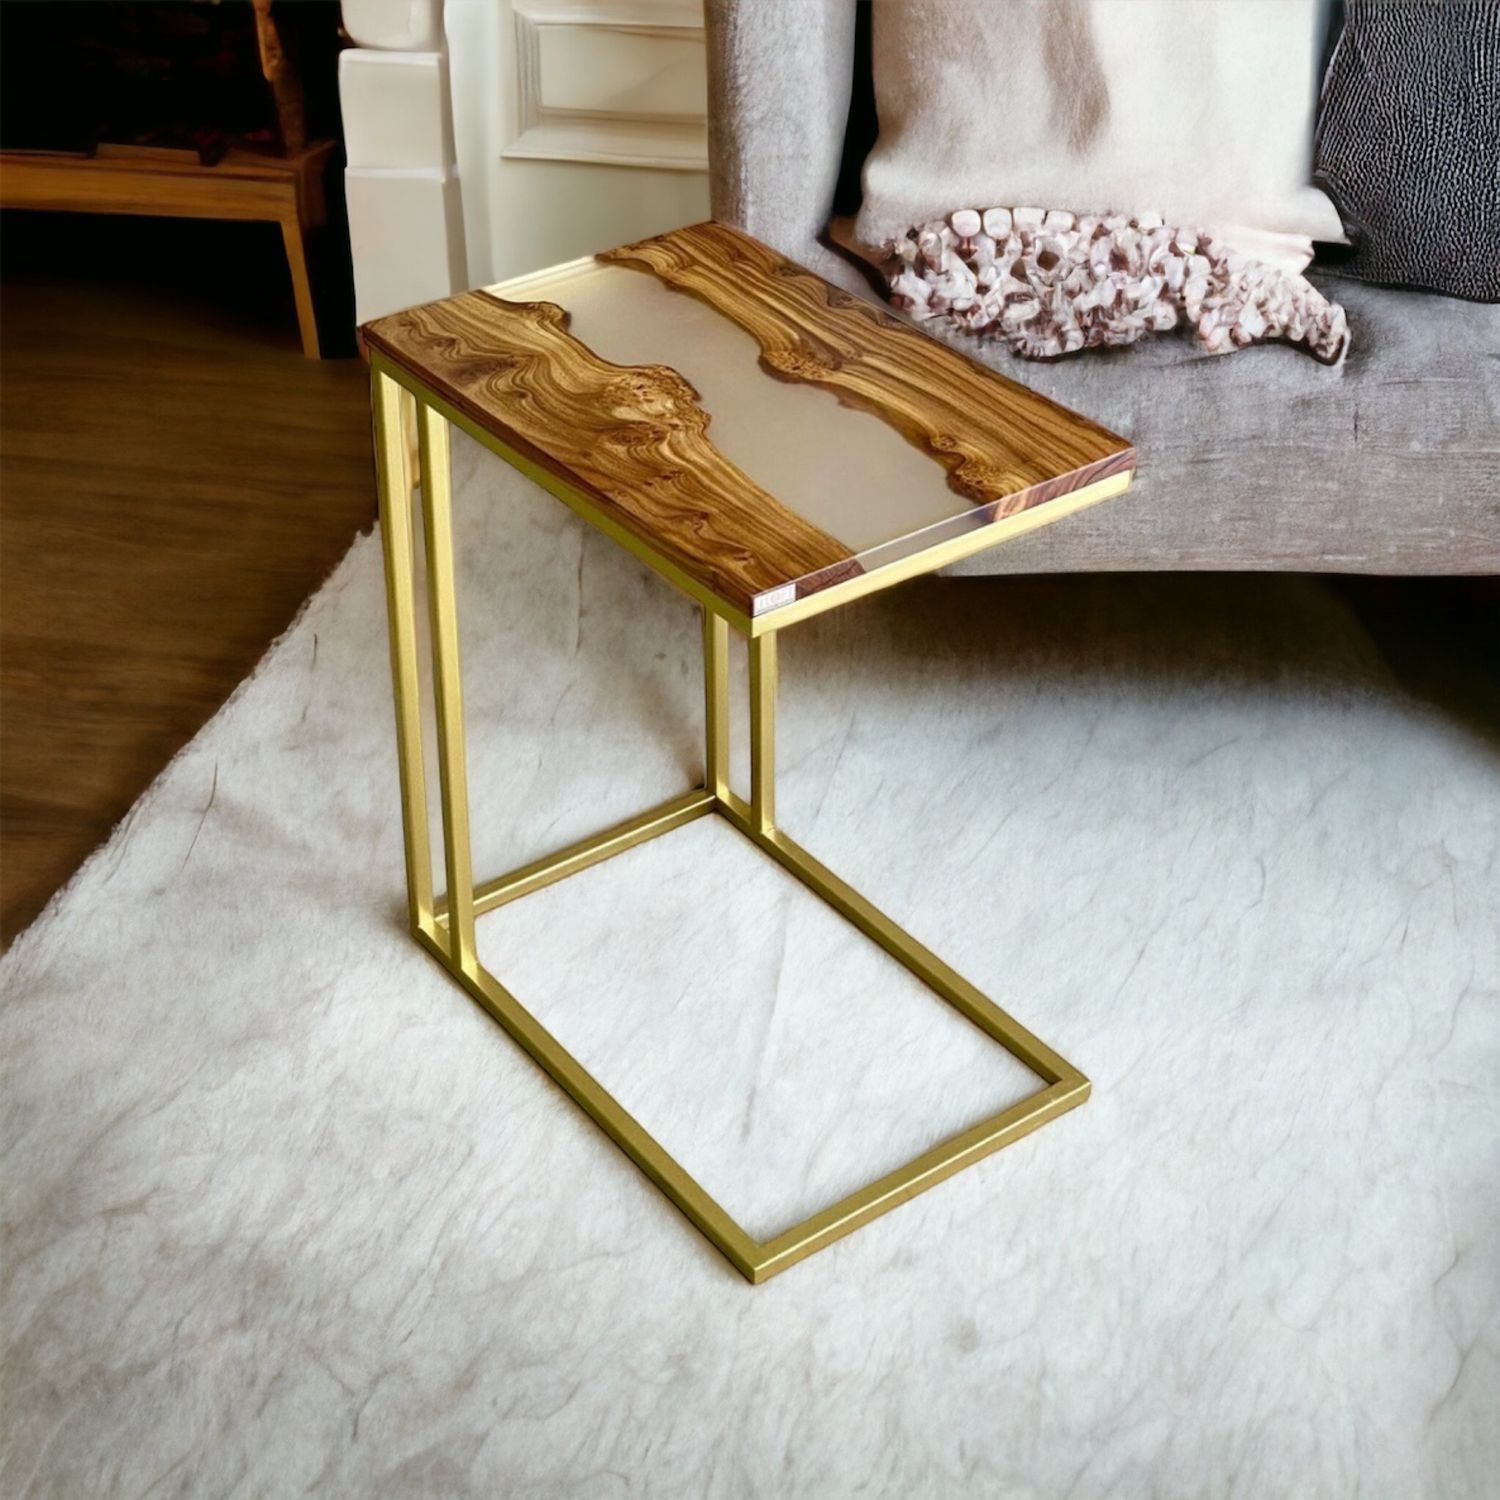 Lecto GOLD side table, Tables, Ivanovo,  Фото №1